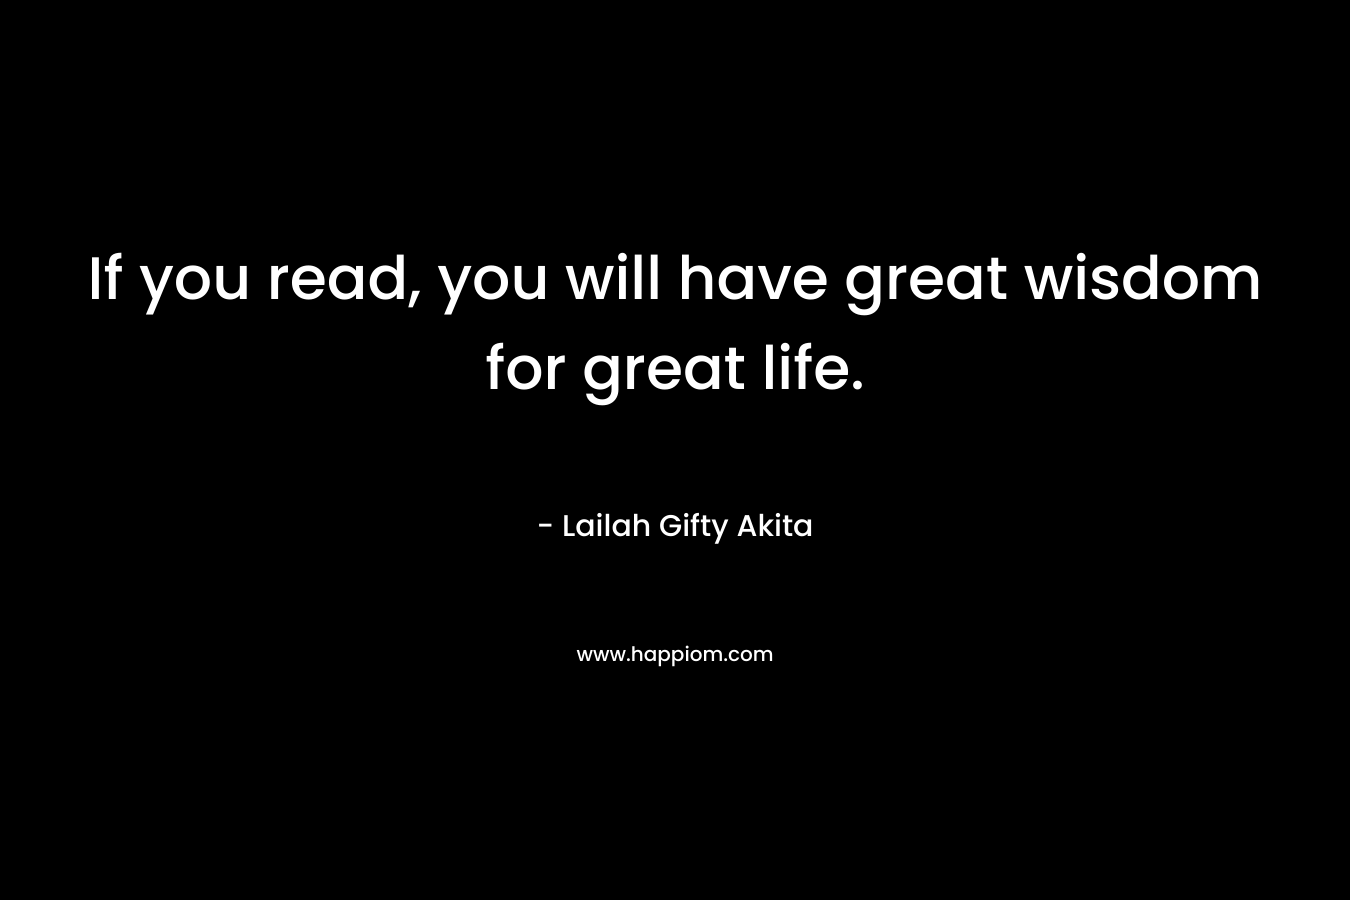 If you read, you will have great wisdom for great life.